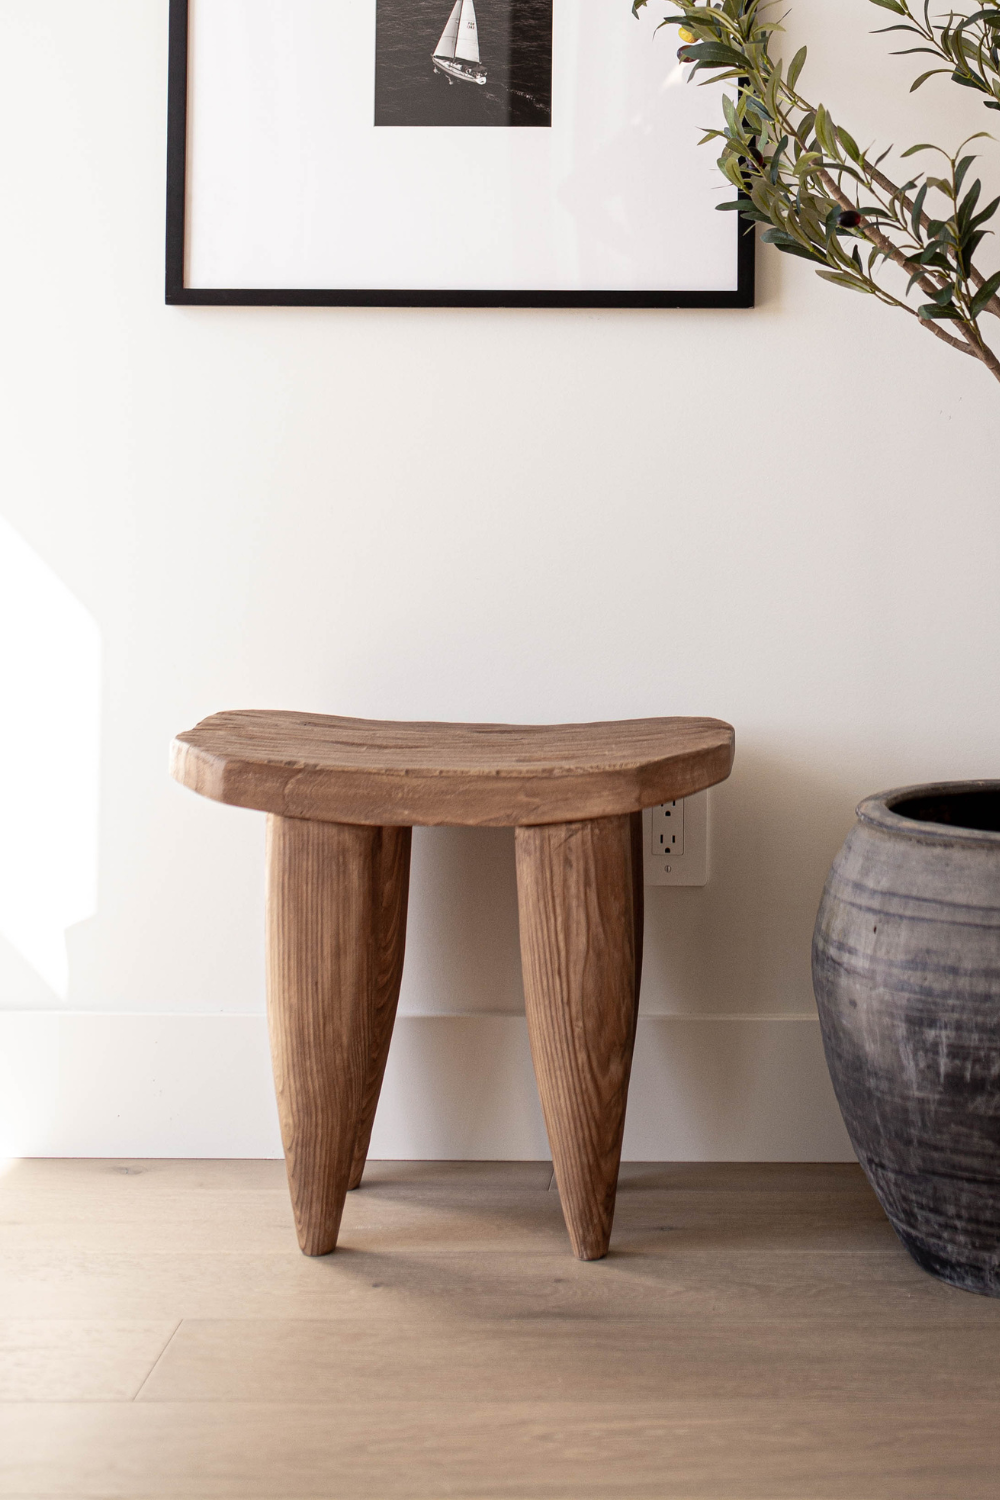 NEW! Senufo Stool Bench Warm Natural Elm Large - Luxe B Pampas Grass  Vintage Home Decor Shop Luxe B Co Instagram